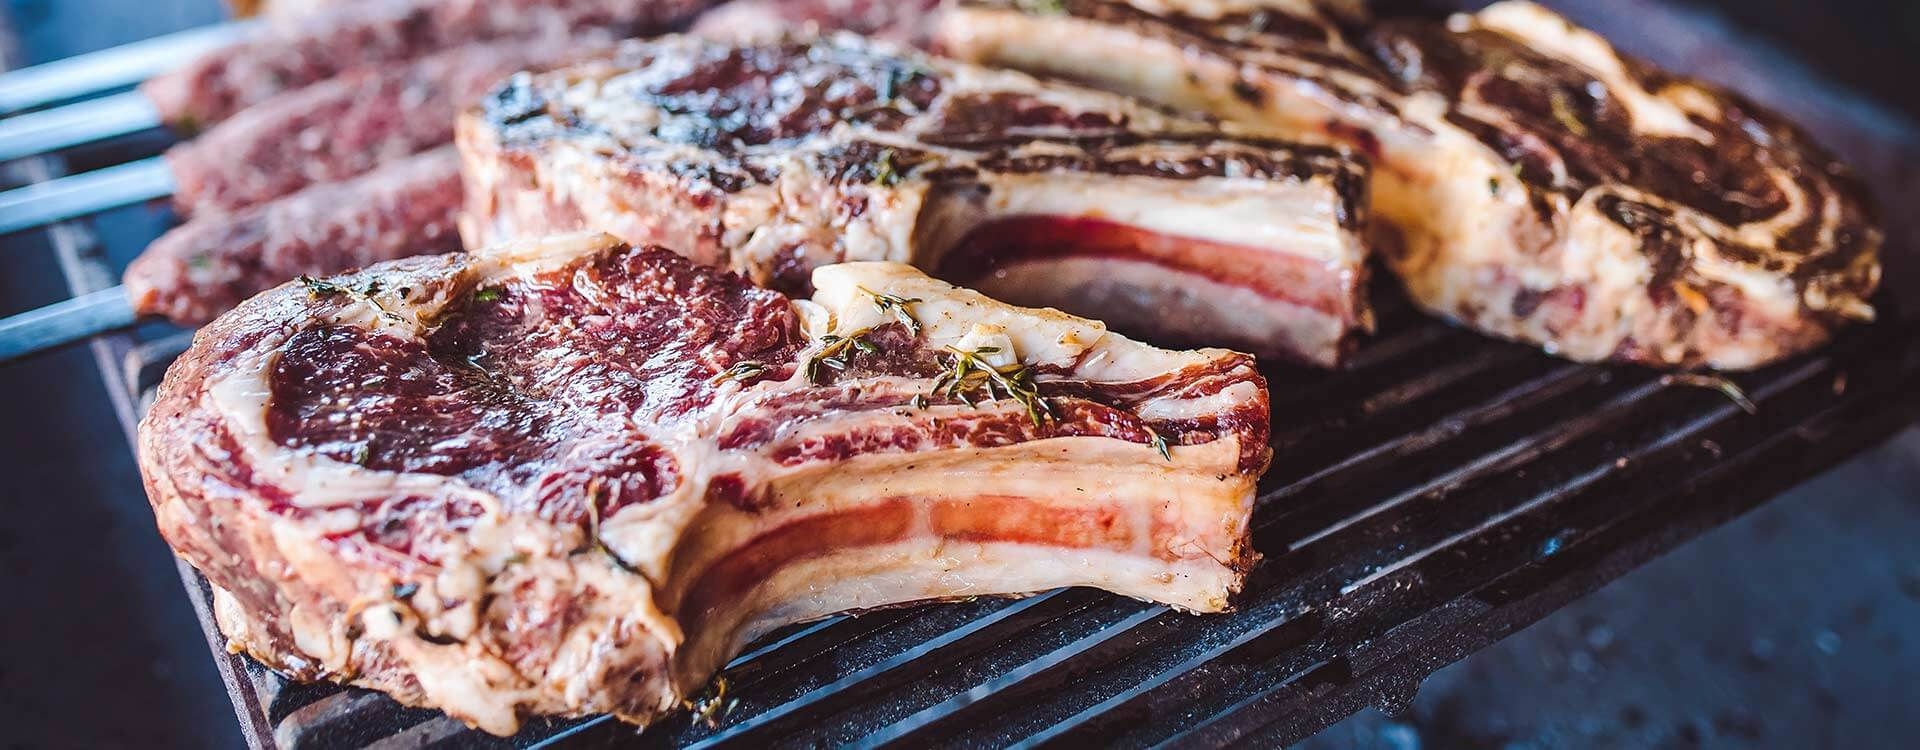 Everything you need to know for an epic barbecue